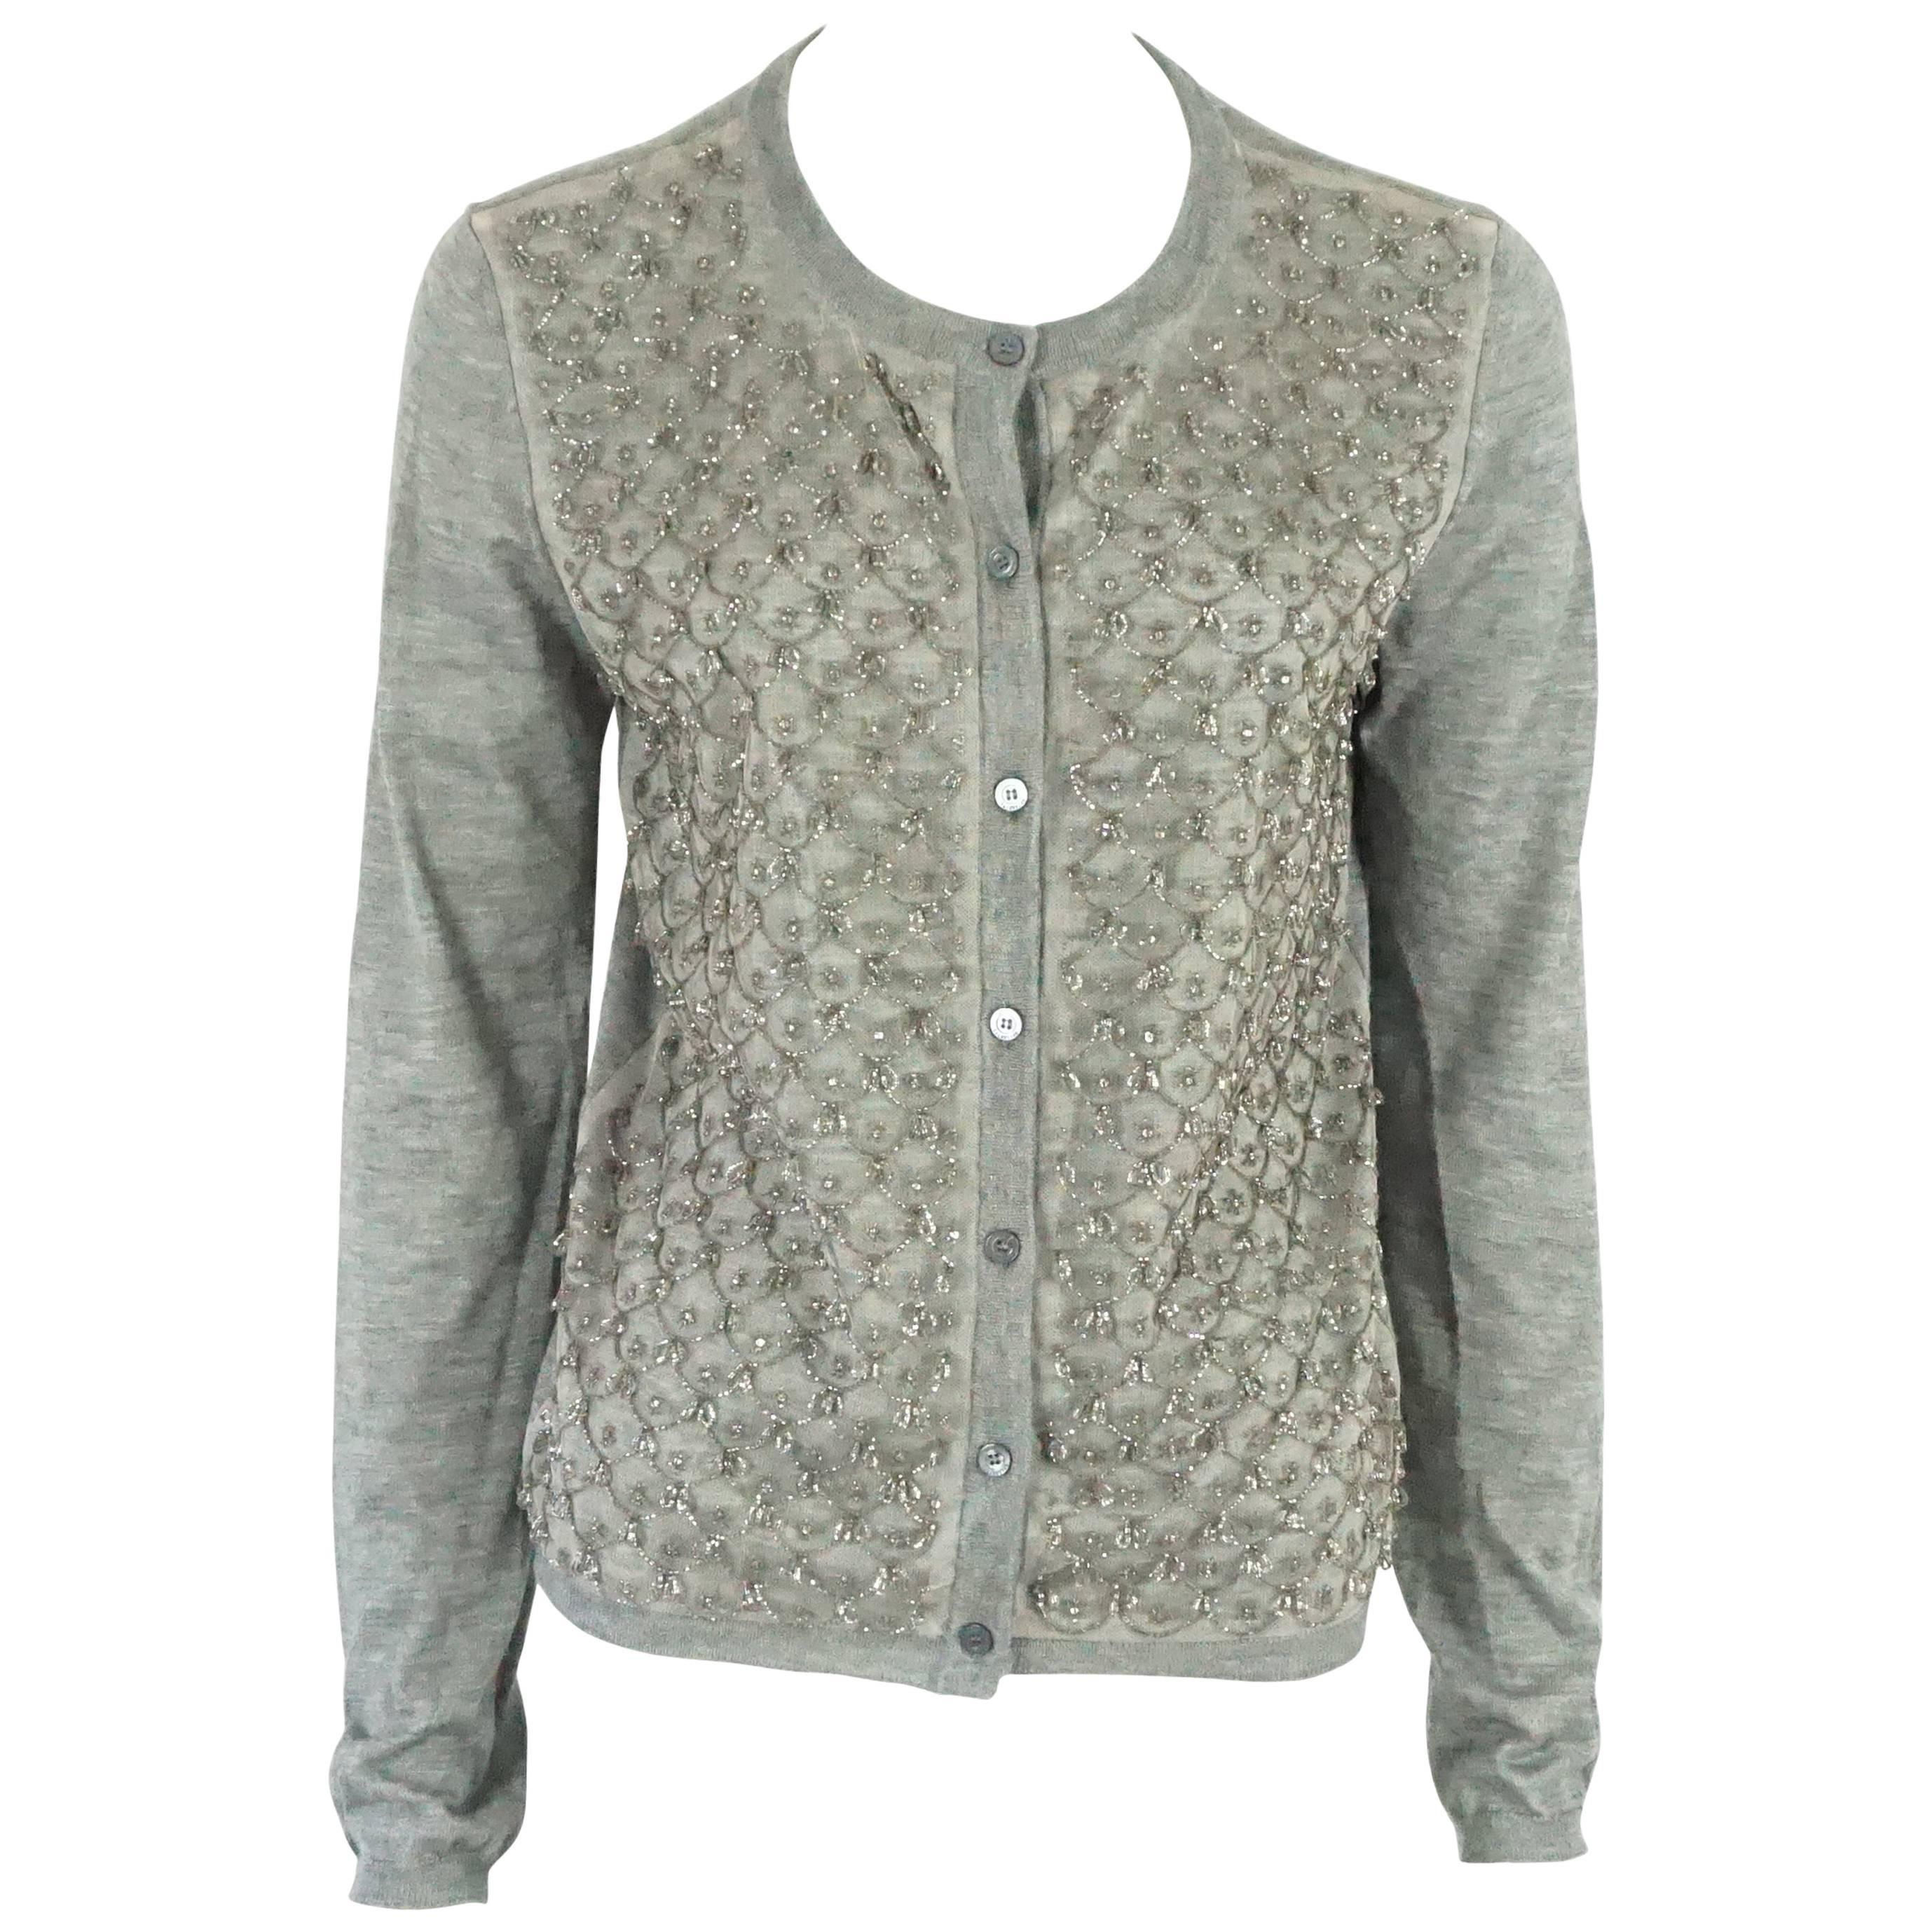 Valentino Gray Cotton-Knit Cardigan with Beaded Design - M